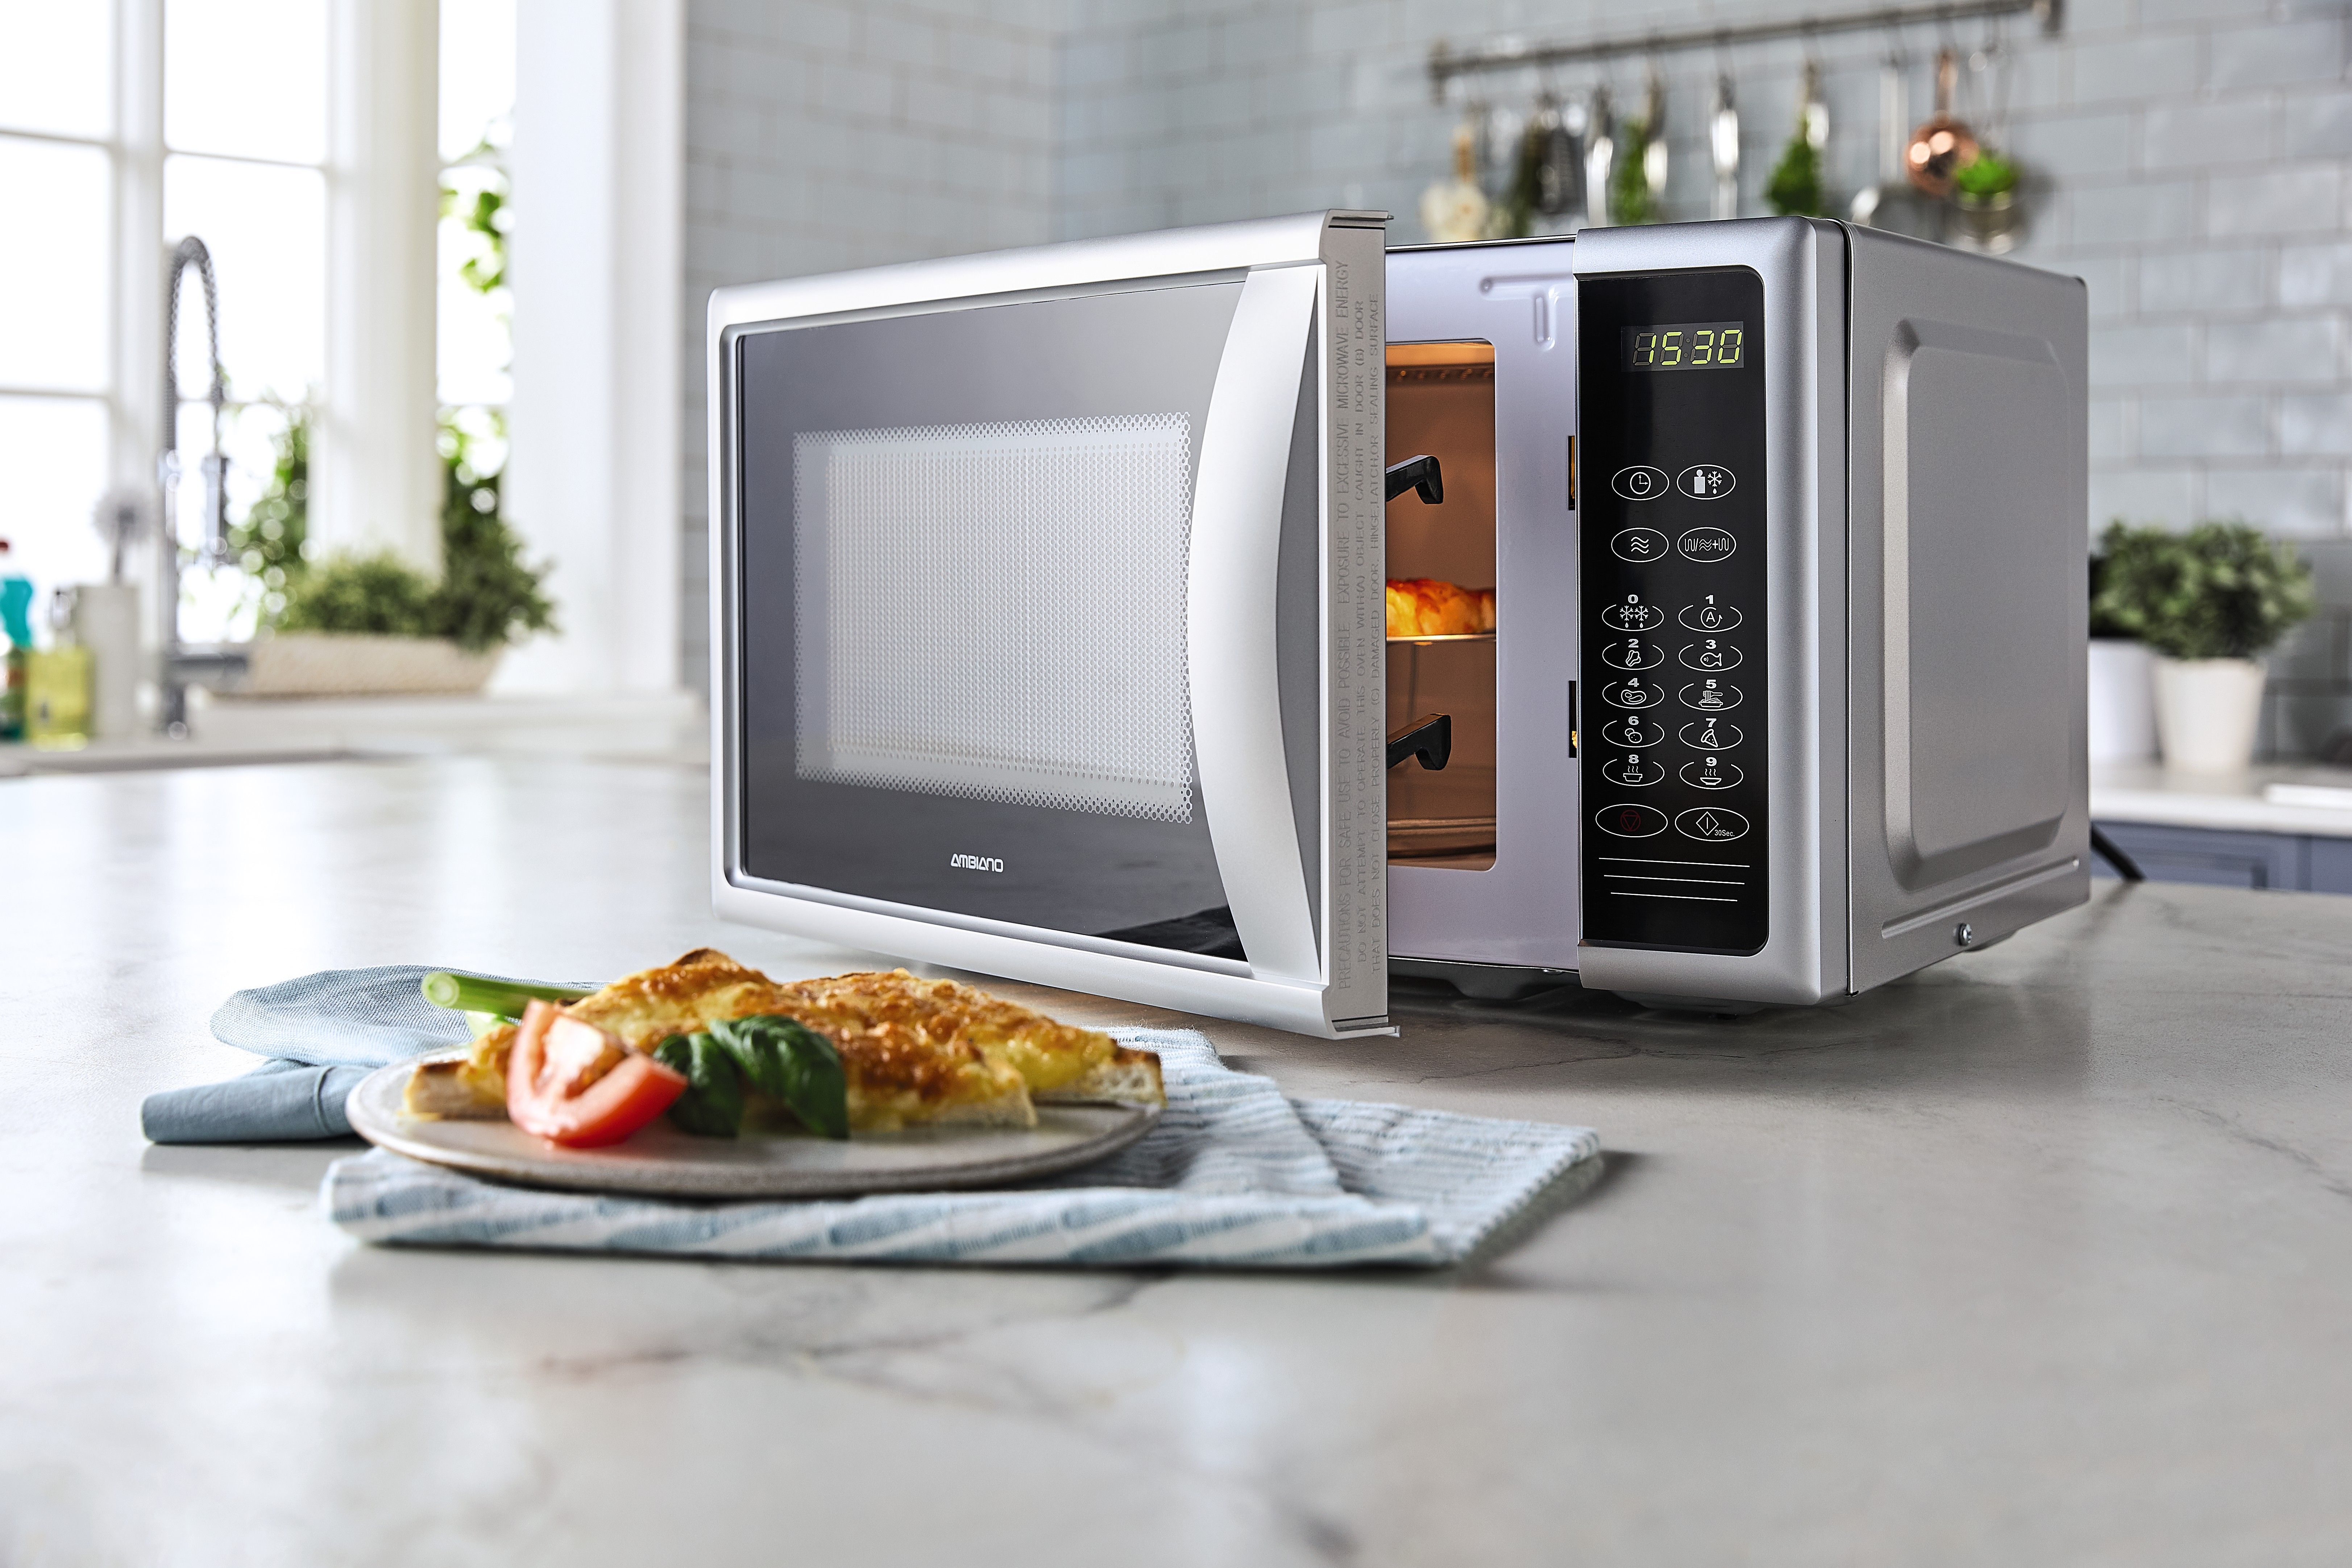 How to Use Solo Microwave Oven? 